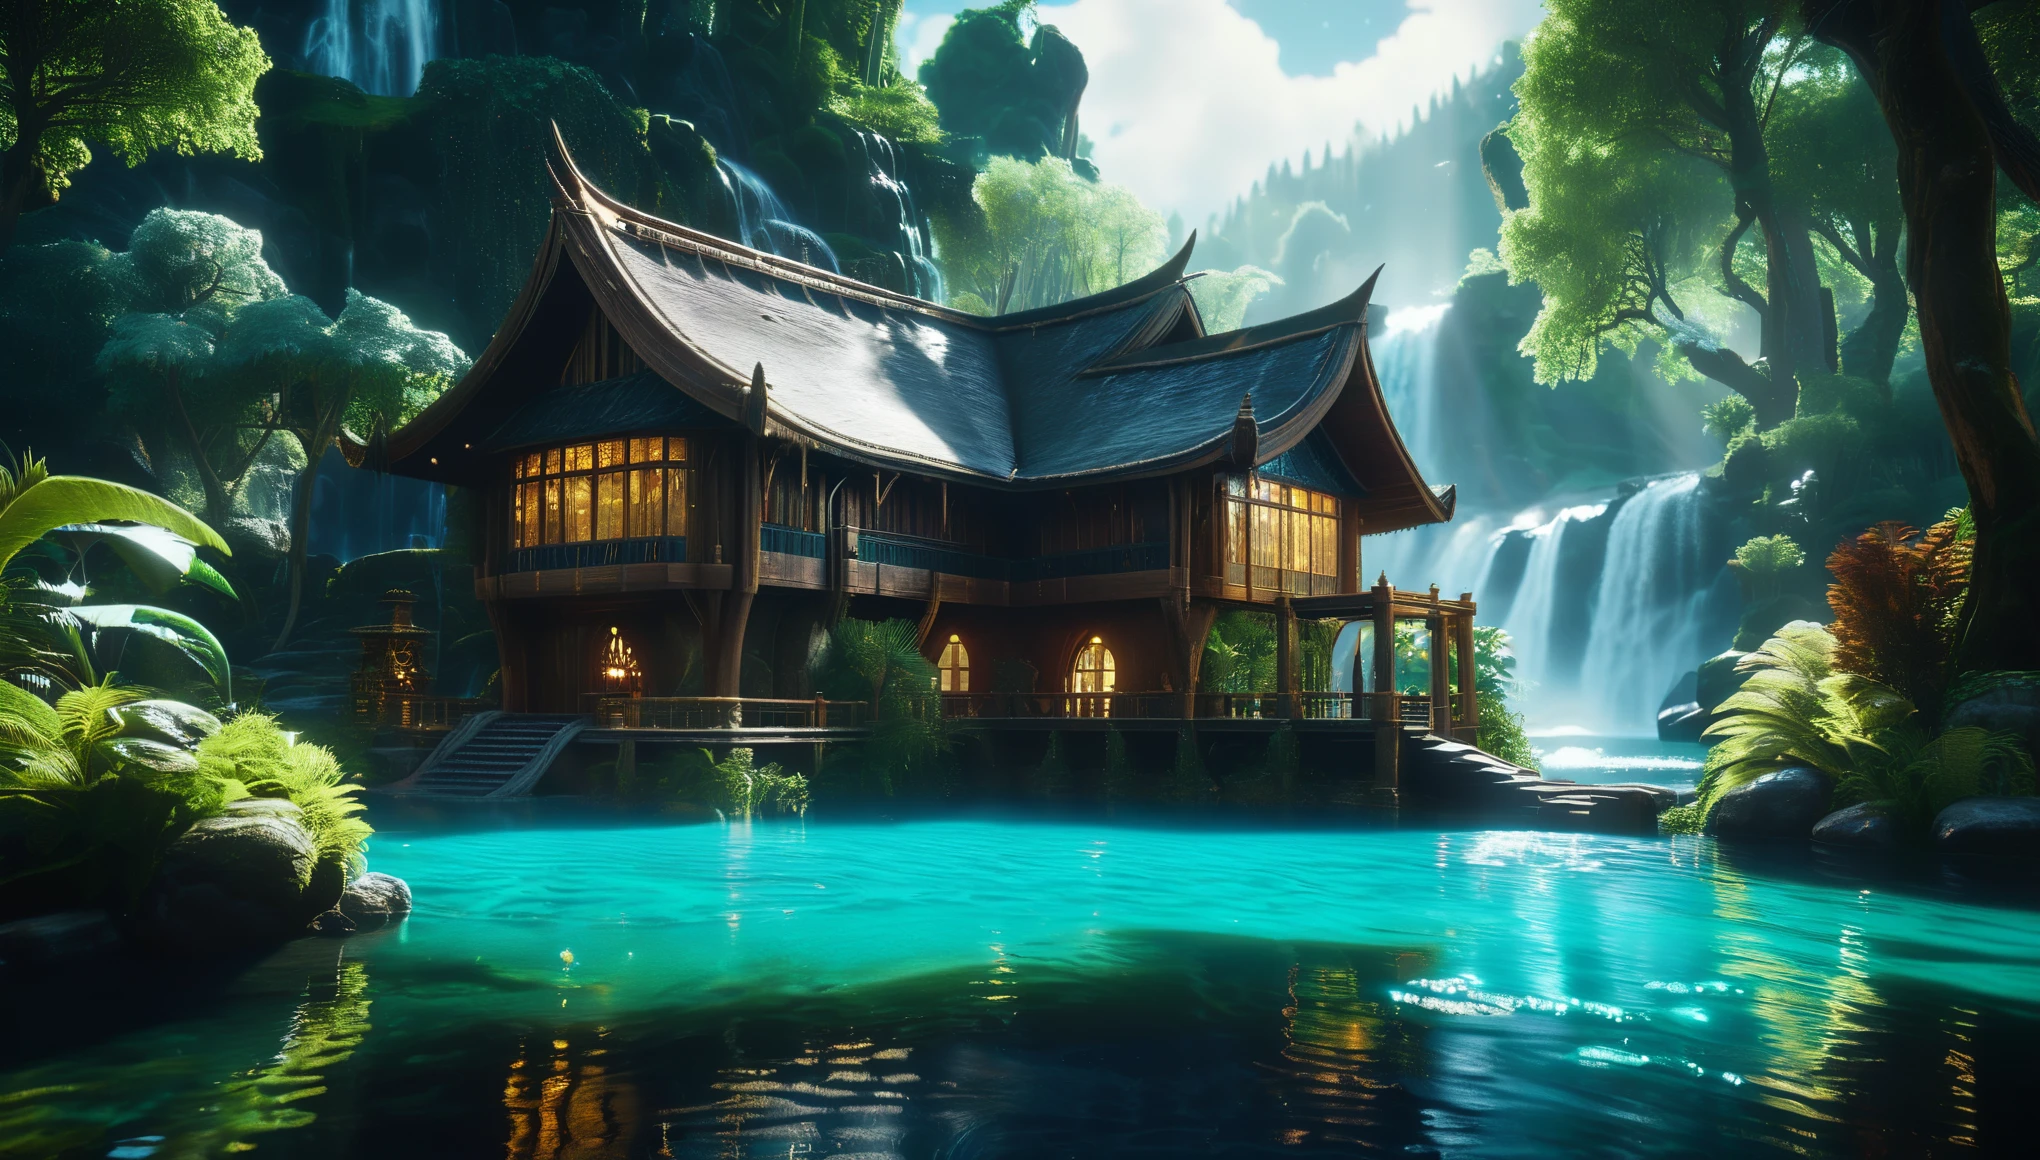 photorealistic wooden house in the middle of the lifelike forest, surrounded by realistic rivers and waterfalls, translucent fresh water with specular reflections, hyperrealistic medieval fantasy landscape, mystical atmosphere, (ultra sharp infinity focus, crystal clear. Extremely realistic ray traced scene with whimsical godrays, lifelike Volumetric lighting, ultra realistic Volumetric shadows, Volumetric Fog, Path Tracing, photon mapping, Simplygon, Displacement Mapping, Photometric stereo, Subsurface Scattering, long and deep shadows:1.3), subtle atmospheric effects, dazzling light effects, (max intricate details utilizing meticulous layered detailing to achieve insanely ultra high intricate Levels of Detail, max geometry detail, max scene detail, insanely intricate max environment detail:1.2). (Perfect antialiasing and anisotropic filtering for insanely sharp edges and contours:1.2). perfectly arranged dynamic scene, best dynamic perspective, highly decorated dynamic background, (amazing depth, immersive Depth Buffer:1:1), perfect contrast, best saturation, professional mirrorless camera in ultra HD mode, extremely sharp lens, vibrant film, (vivid CMYK colors, best color space, immaculate dynamic composition, Cutting-edge photography equipment and photorealistic rendering techniques to capture hypermaximalist detailing in best quality. Postproduction, Postprocessing. Highly polished, enhanced and refined imagery in hypermaximalist quality and breathtaking Absurdres:1.3). Trending on Artstation, Flickr, Pinterest, Lexica, ffffound, Canon, Hasselblad, Kodak, Fuji, Leica, Sigma, Nikon, Adobe Photoshop Lightroom,